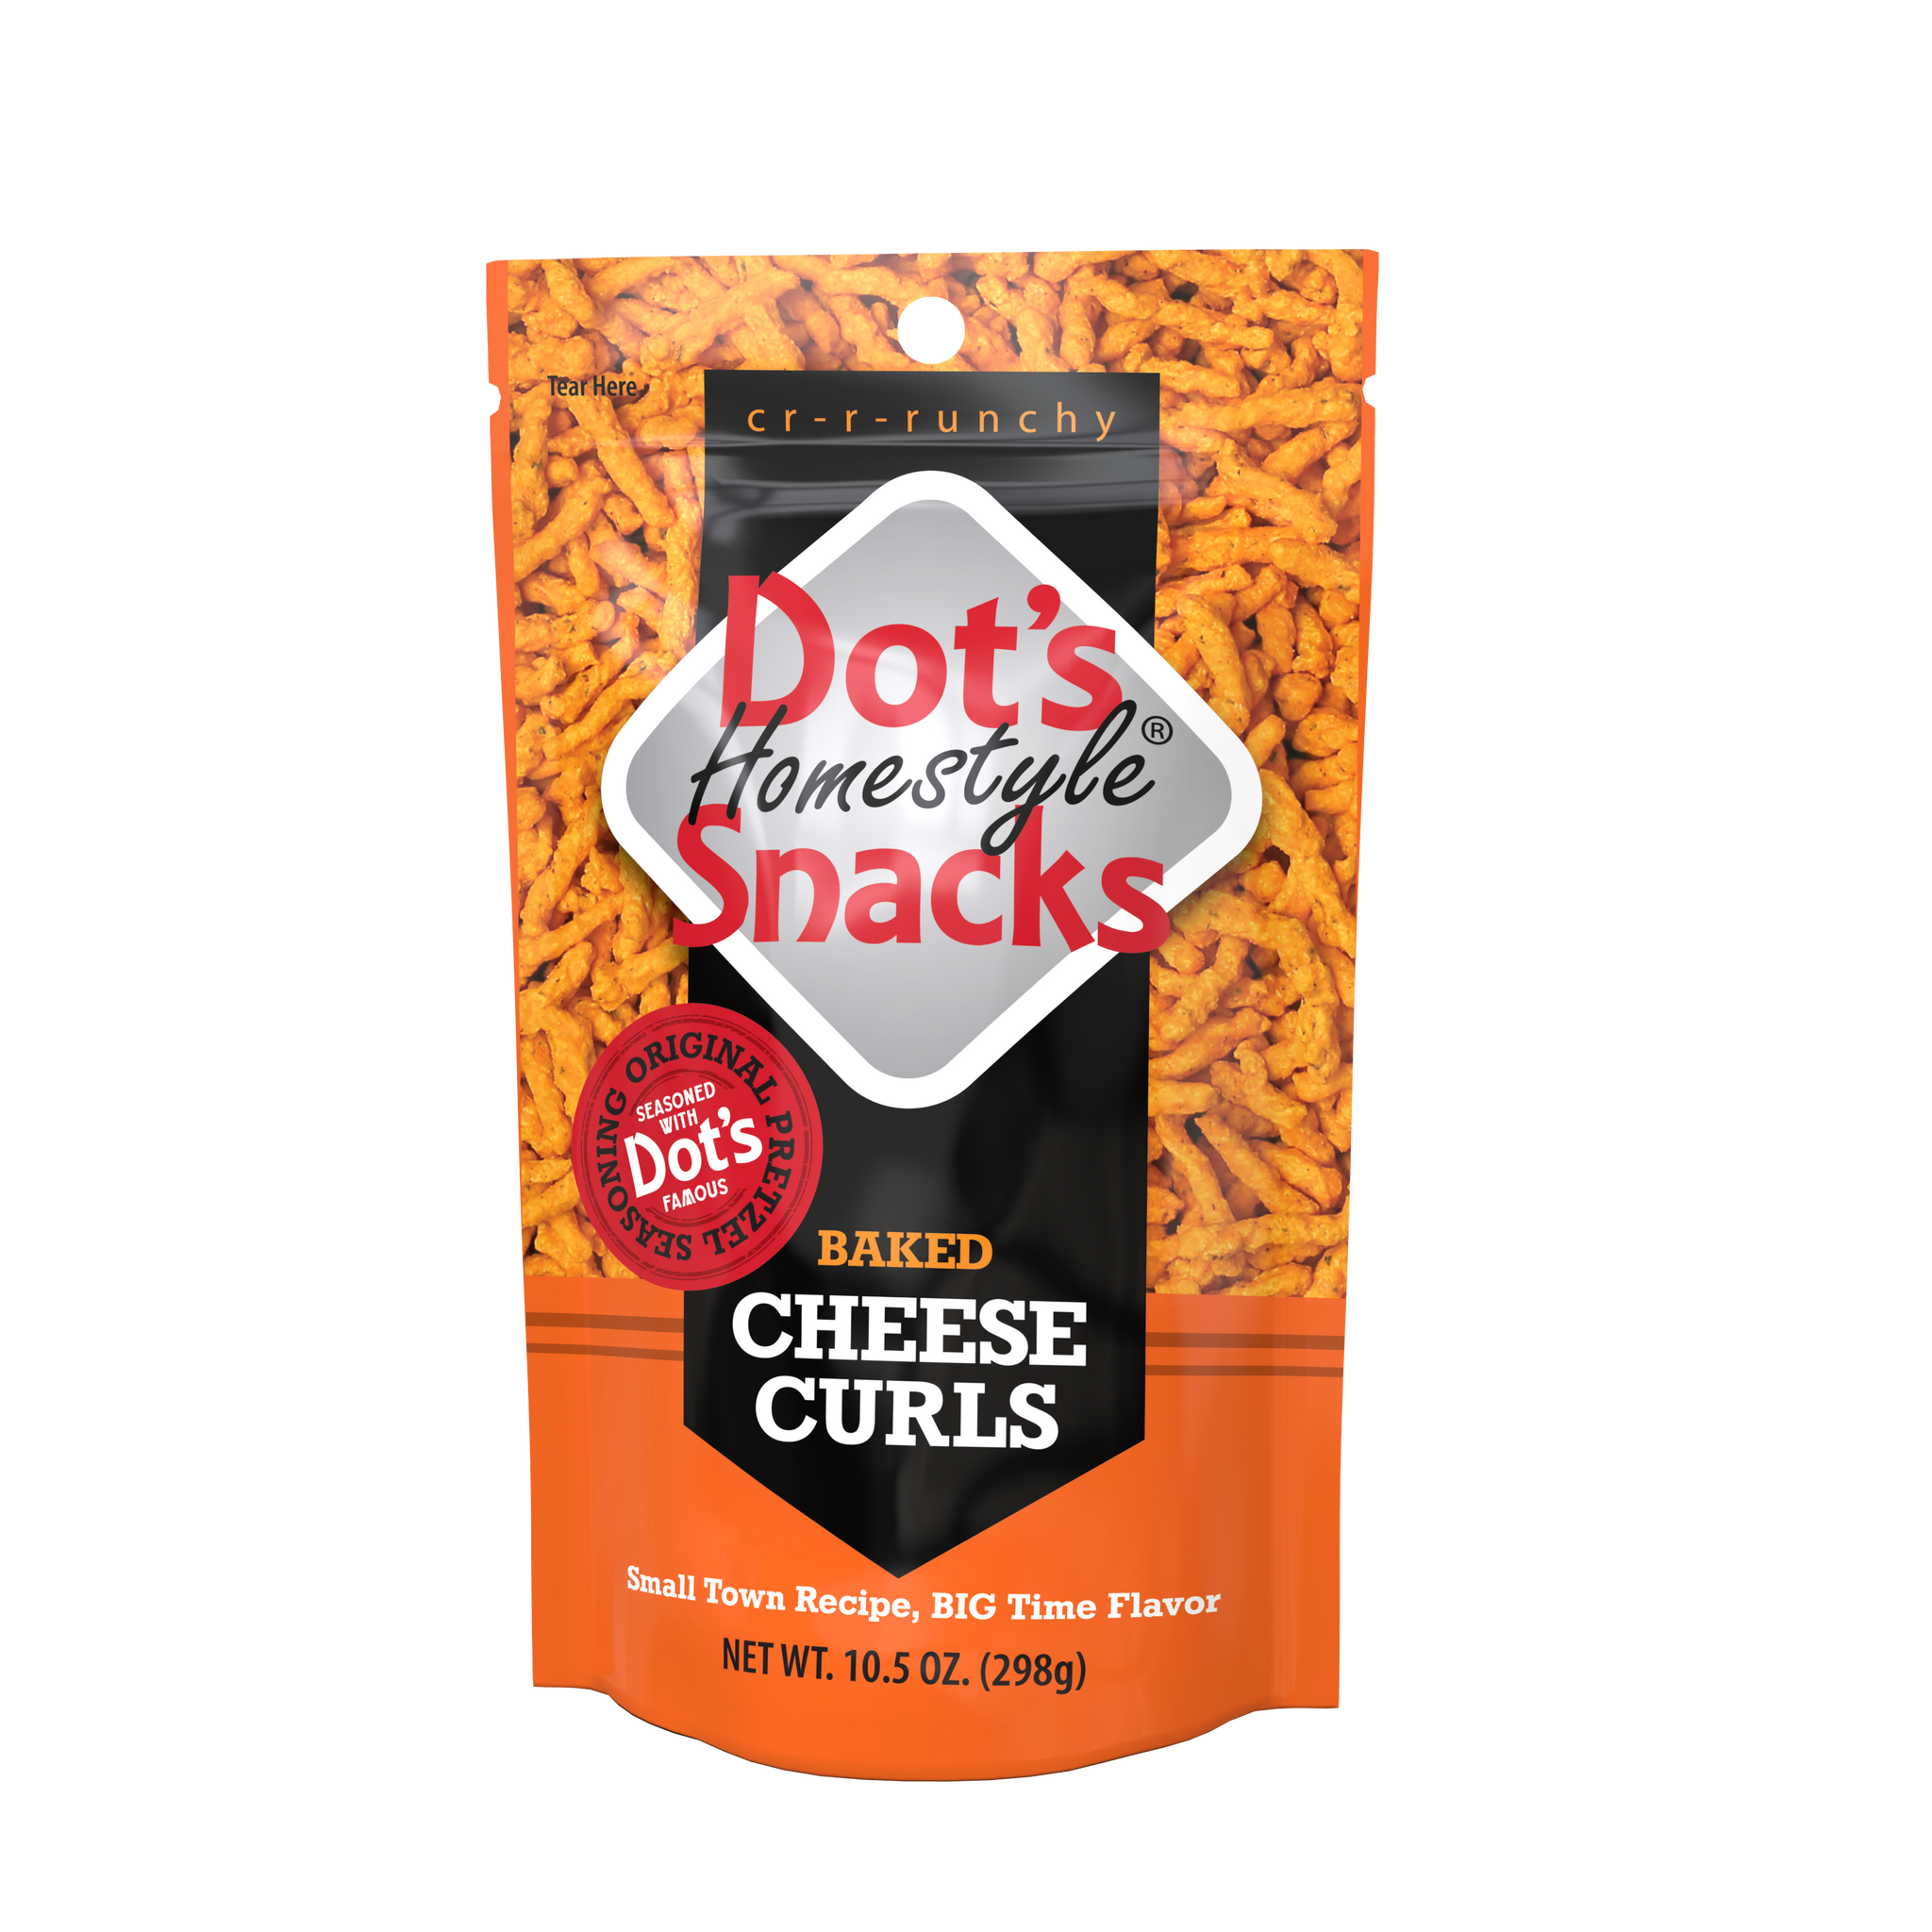 Dot's Homestyle Snacks, Original Seasoned Baked Cheese Curls, Family Size Bag